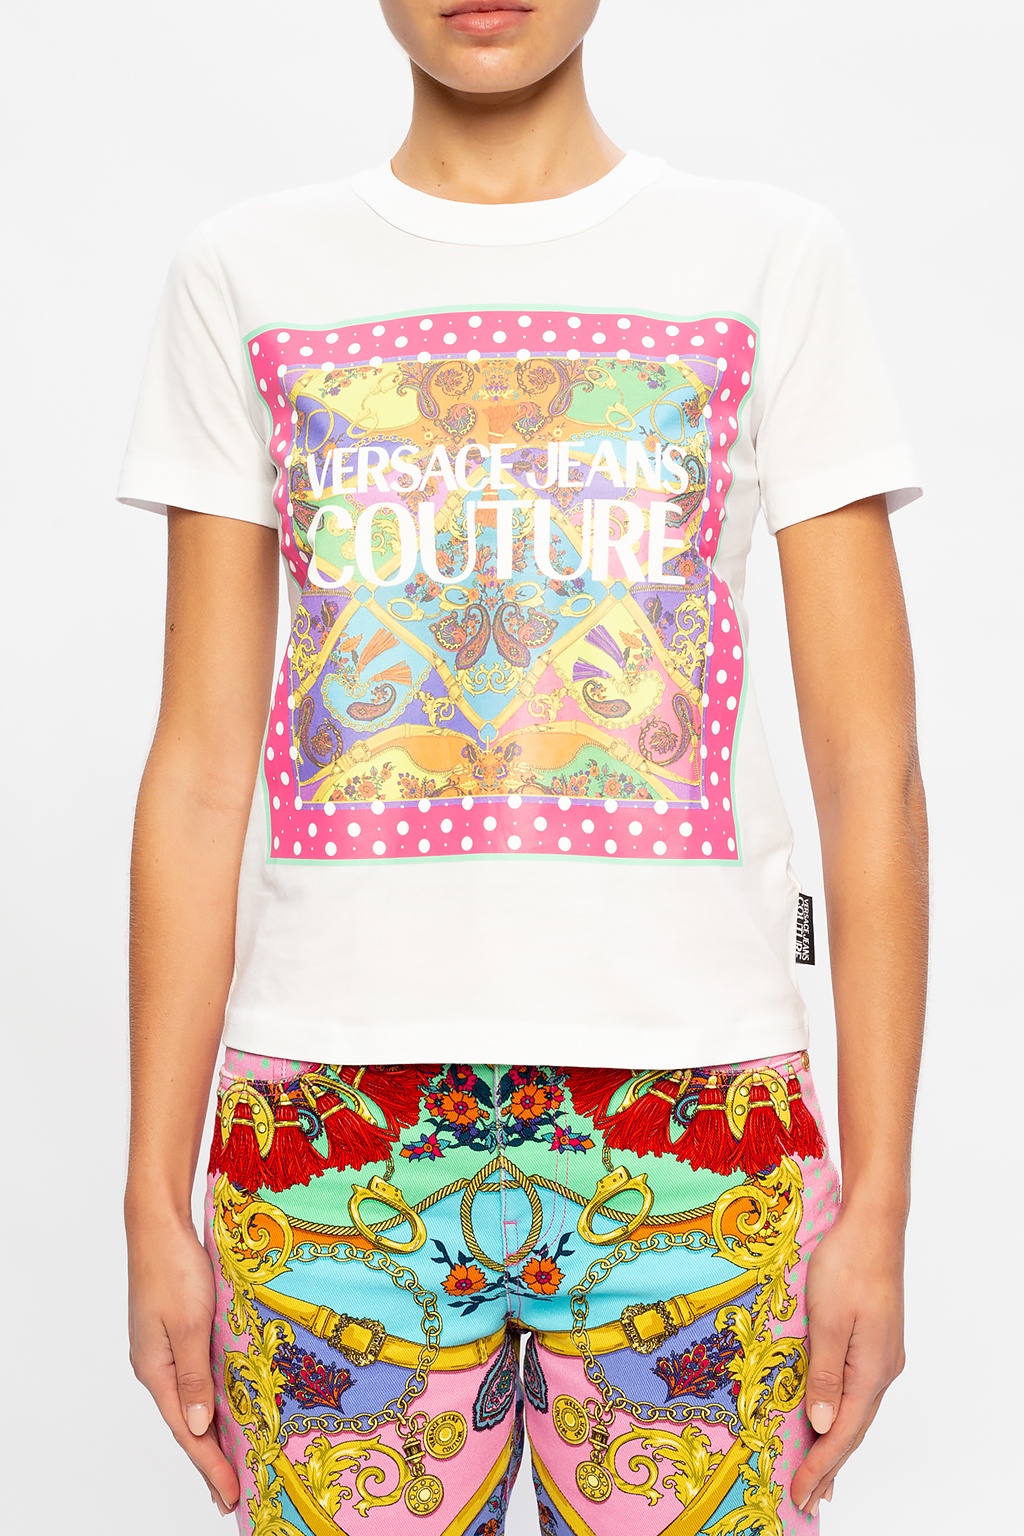 Versace Jeans Couture Printed T-shirt